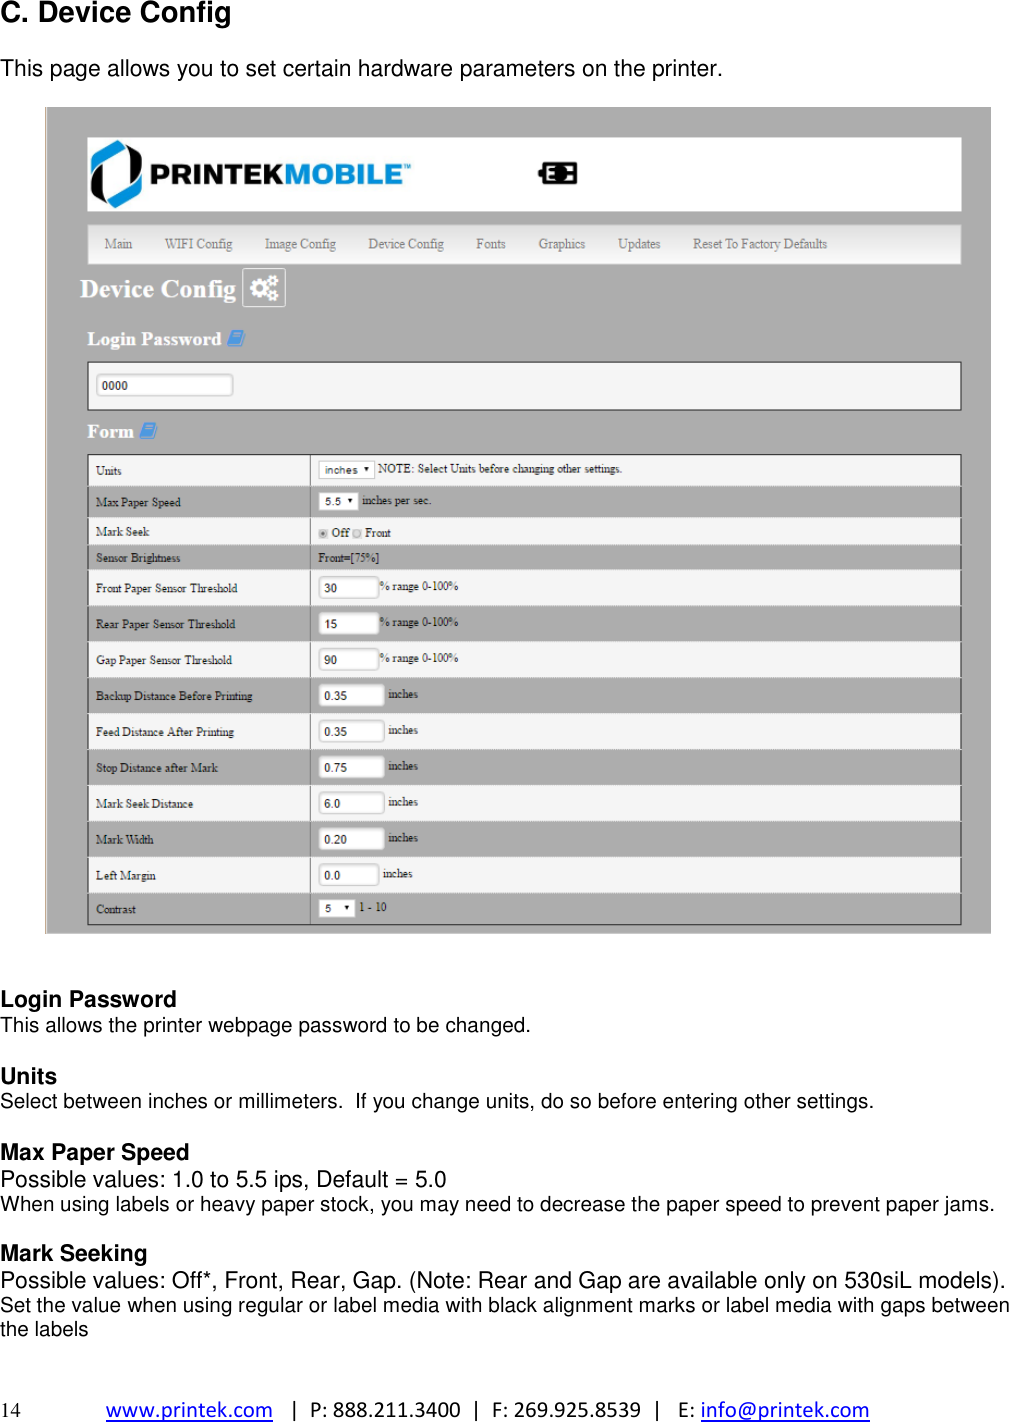  14 www.printek.com   |  P: 888.211.3400  |  F: 269.925.8539  |   E: info@printek.com  C. Device Config  This page allows you to set certain hardware parameters on the printer.     Login Password This allows the printer webpage password to be changed.  Units Select between inches or millimeters.  If you change units, do so before entering other settings.  Max Paper Speed Possible values: 1.0 to 5.5 ips, Default = 5.0 When using labels or heavy paper stock, you may need to decrease the paper speed to prevent paper jams.  Mark Seeking Possible values: Off*, Front, Rear, Gap. (Note: Rear and Gap are available only on 530siL models). Set the value when using regular or label media with black alignment marks or label media with gaps between the labels     